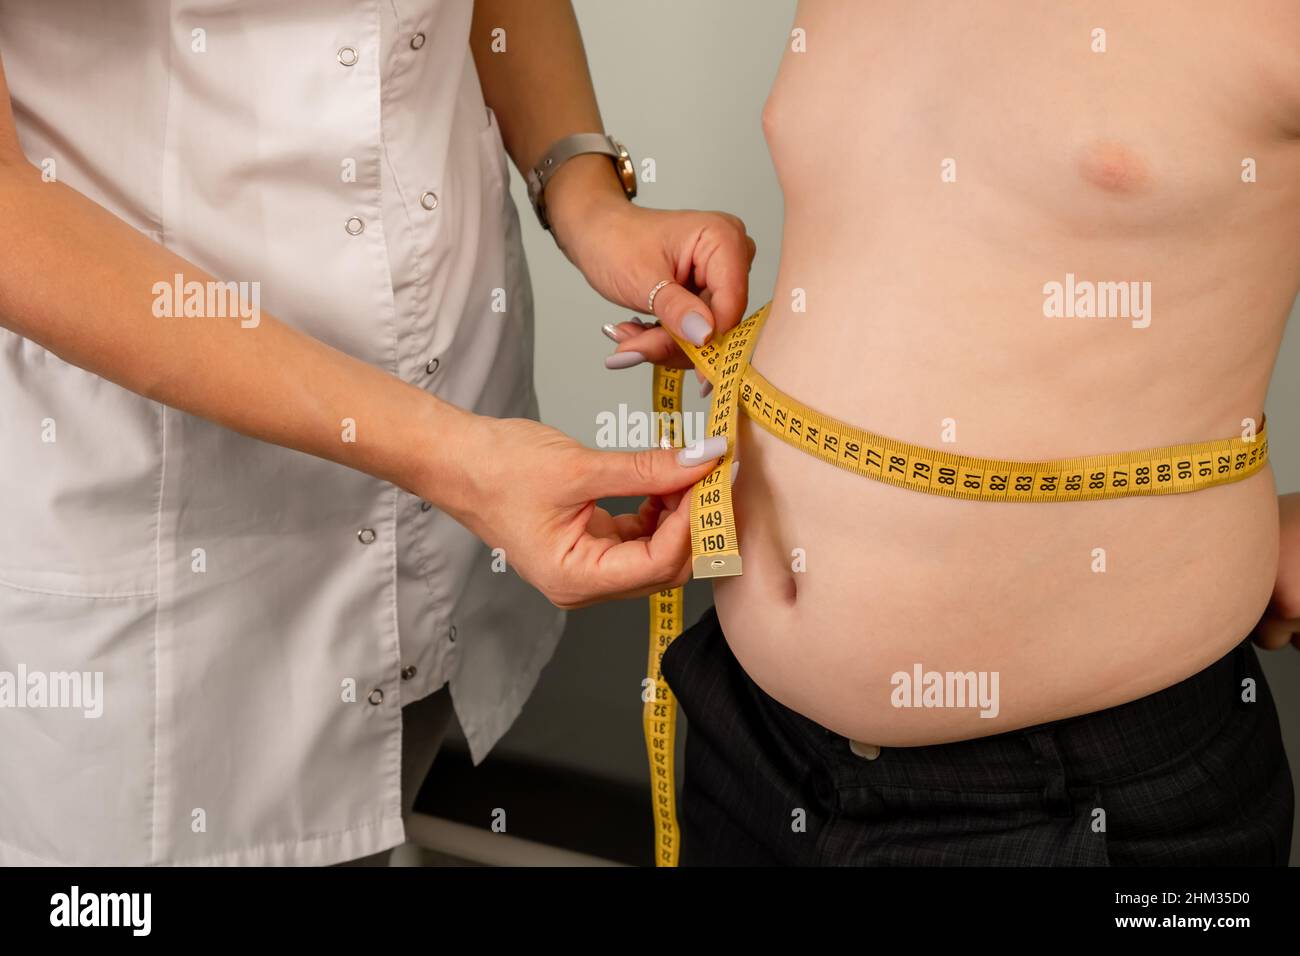 Overweight boy consulting with doctor. Doctor examining fat boy Stock Photo  - Alamy